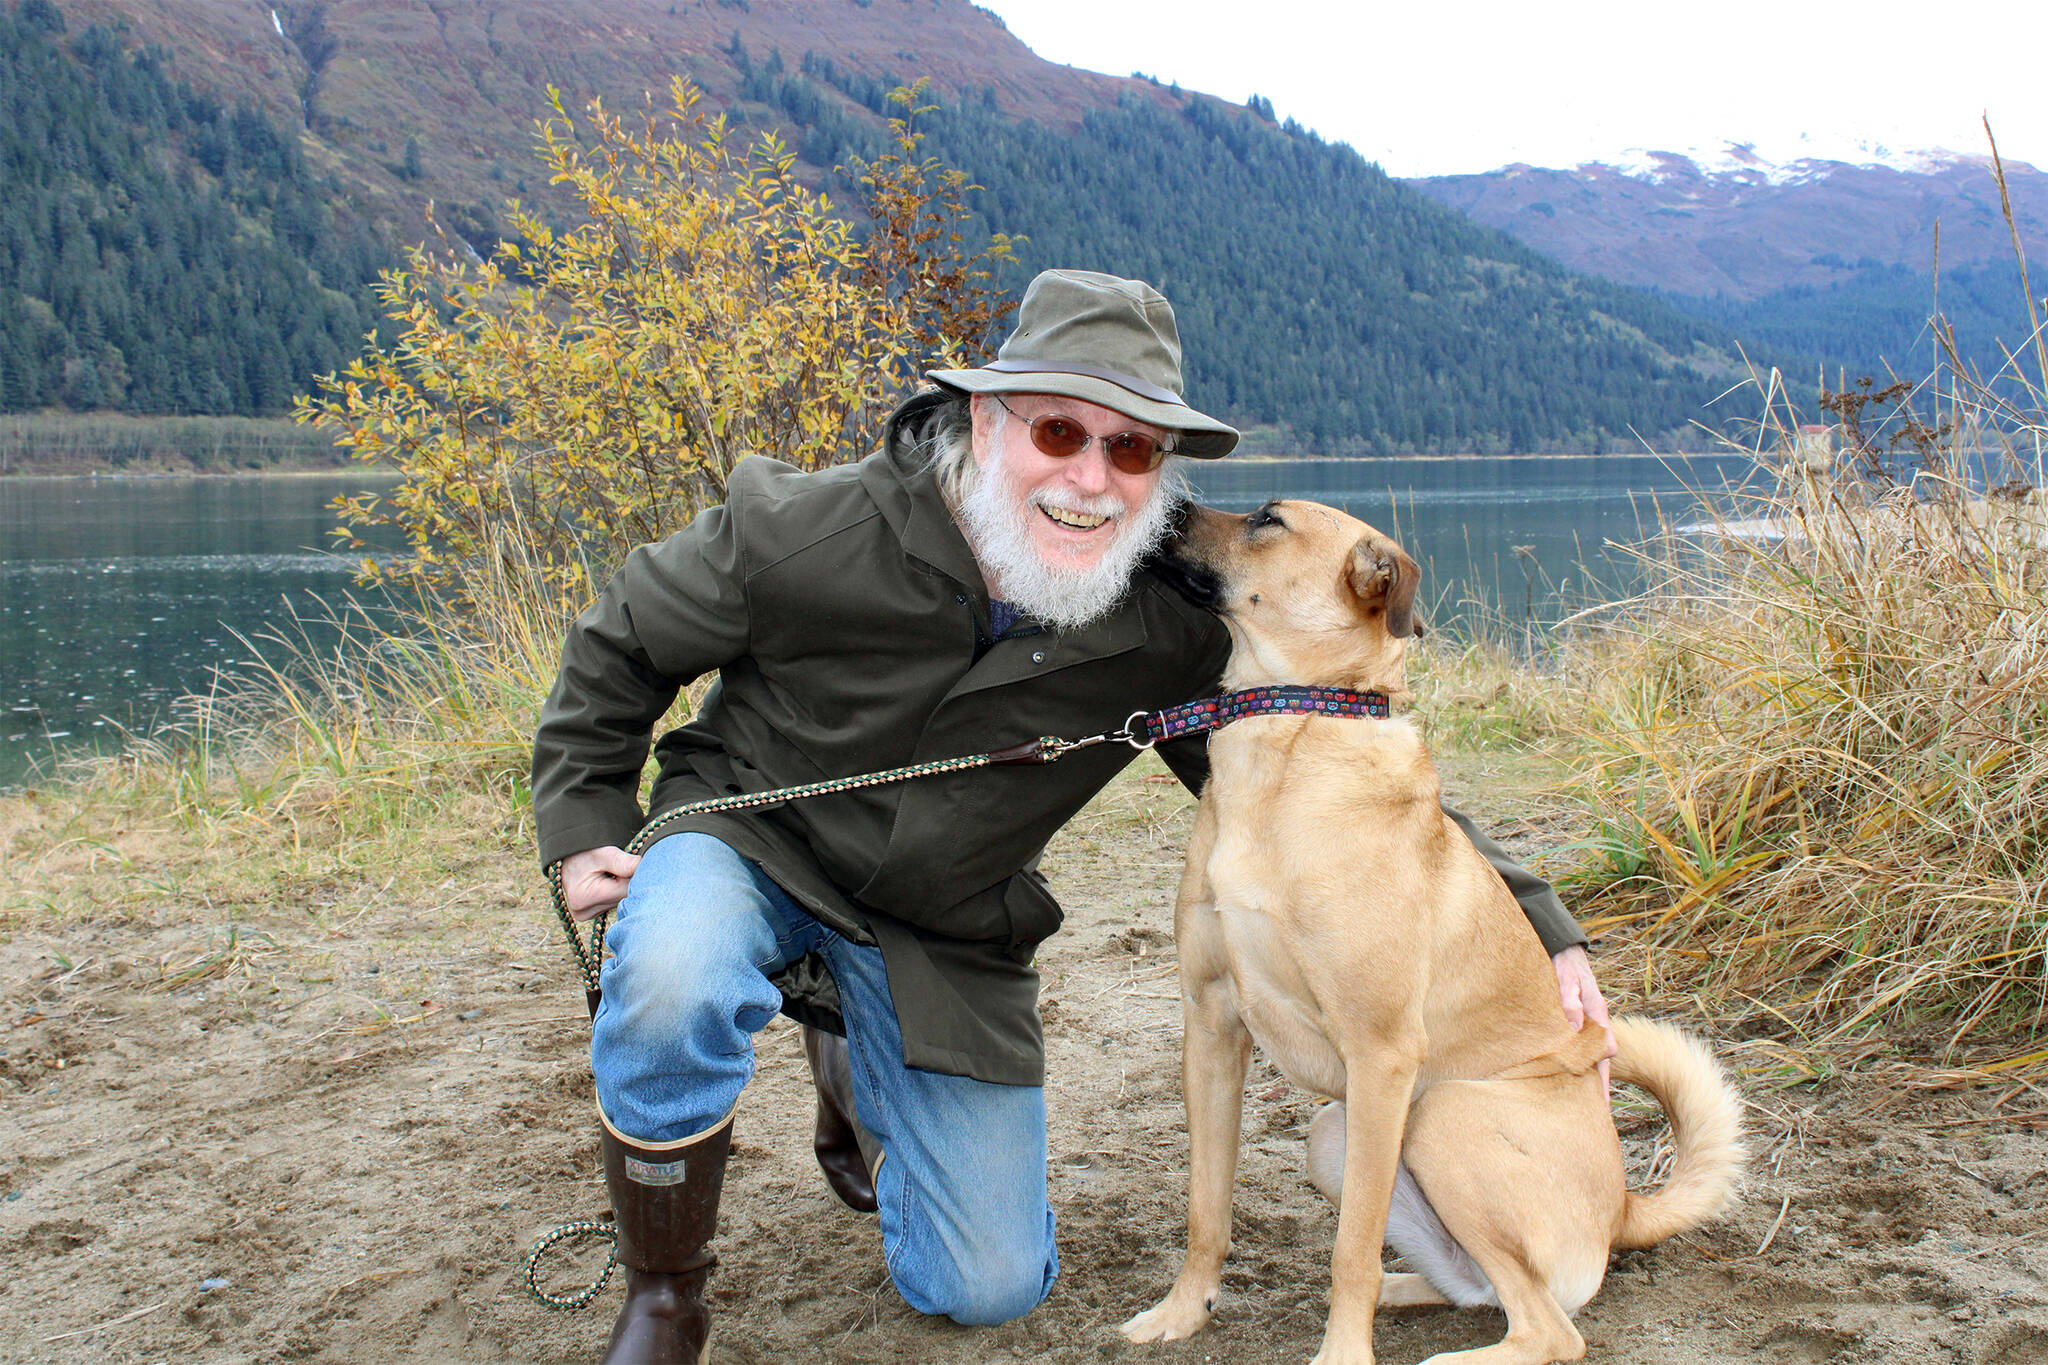 Carl Schrader and his dog, Luna, on Sandy Beach on Oct. 18. Schrader, who is a longtime hospice volunteer, credits a strong personal meditation practice and walks with his dog with helping him restore his emotional energy after working with people who are dying and their families. (Dana Zigmund/Juneau Empire)